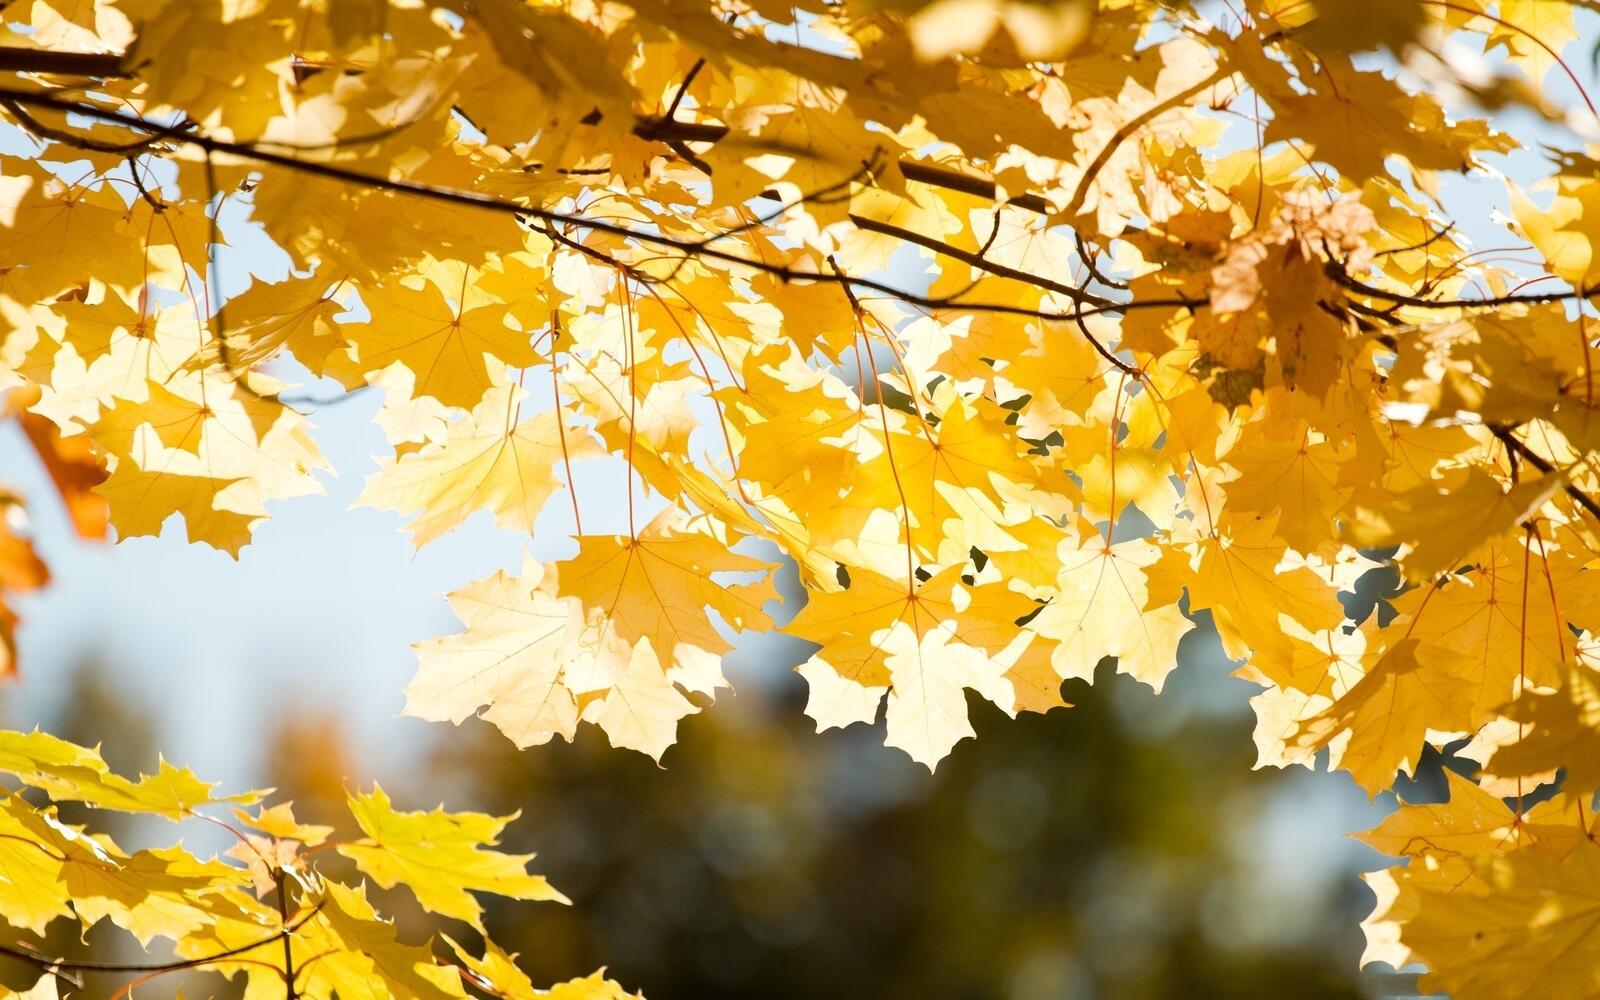 Wallpapers sky autumn leaves wallpaper yellow leaves on the desktop